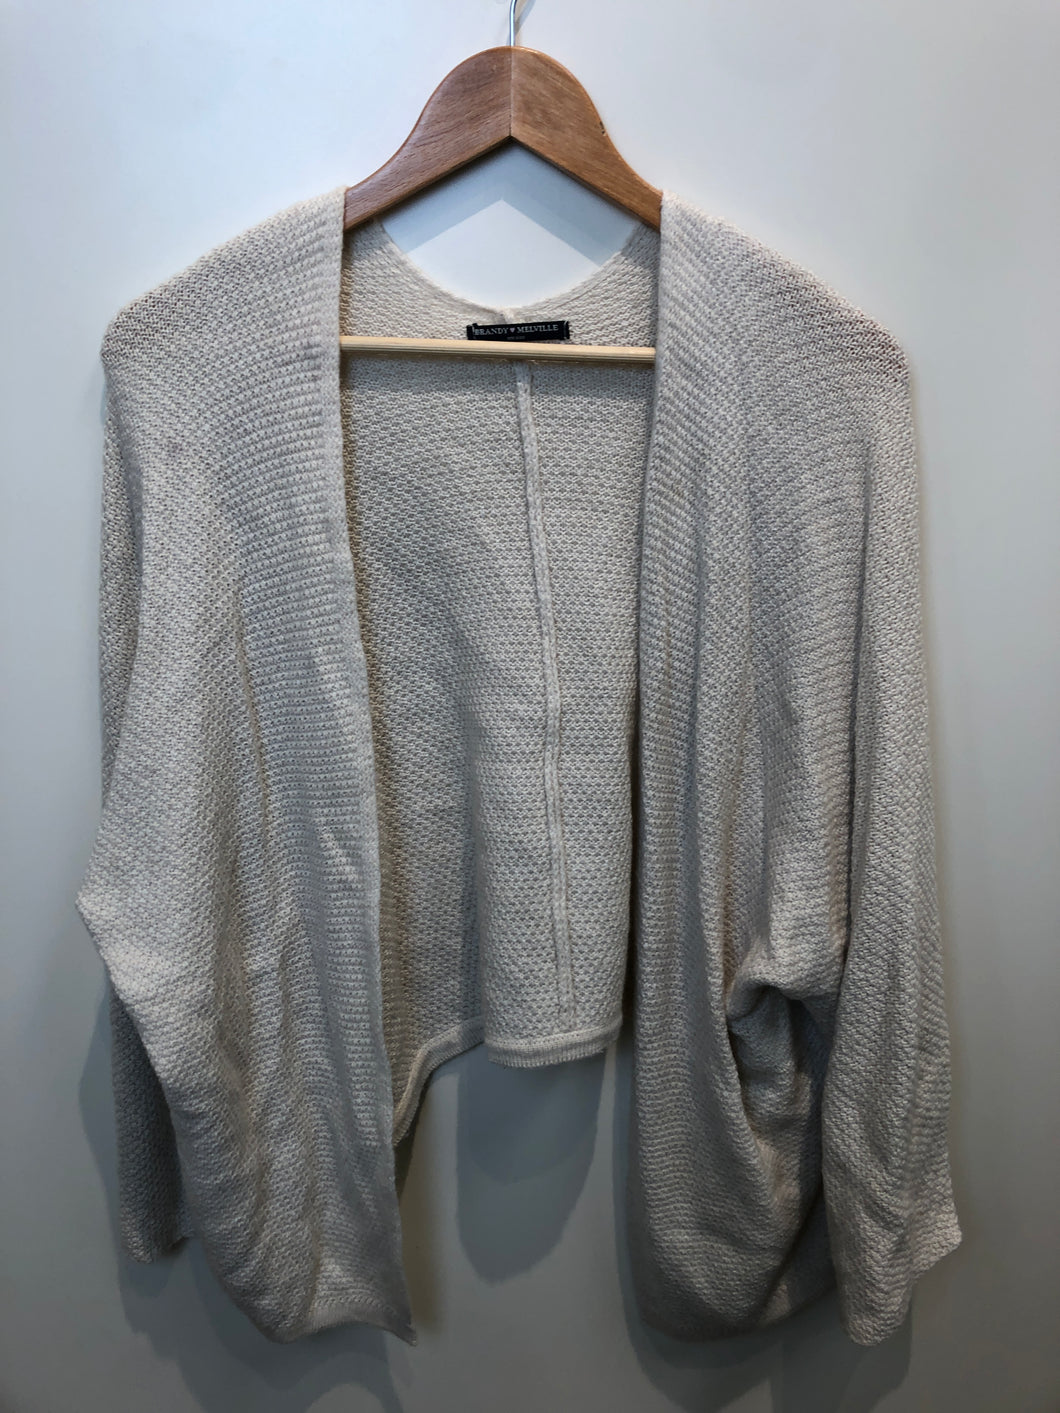 Brandy Melville Womens Sweater Size Small